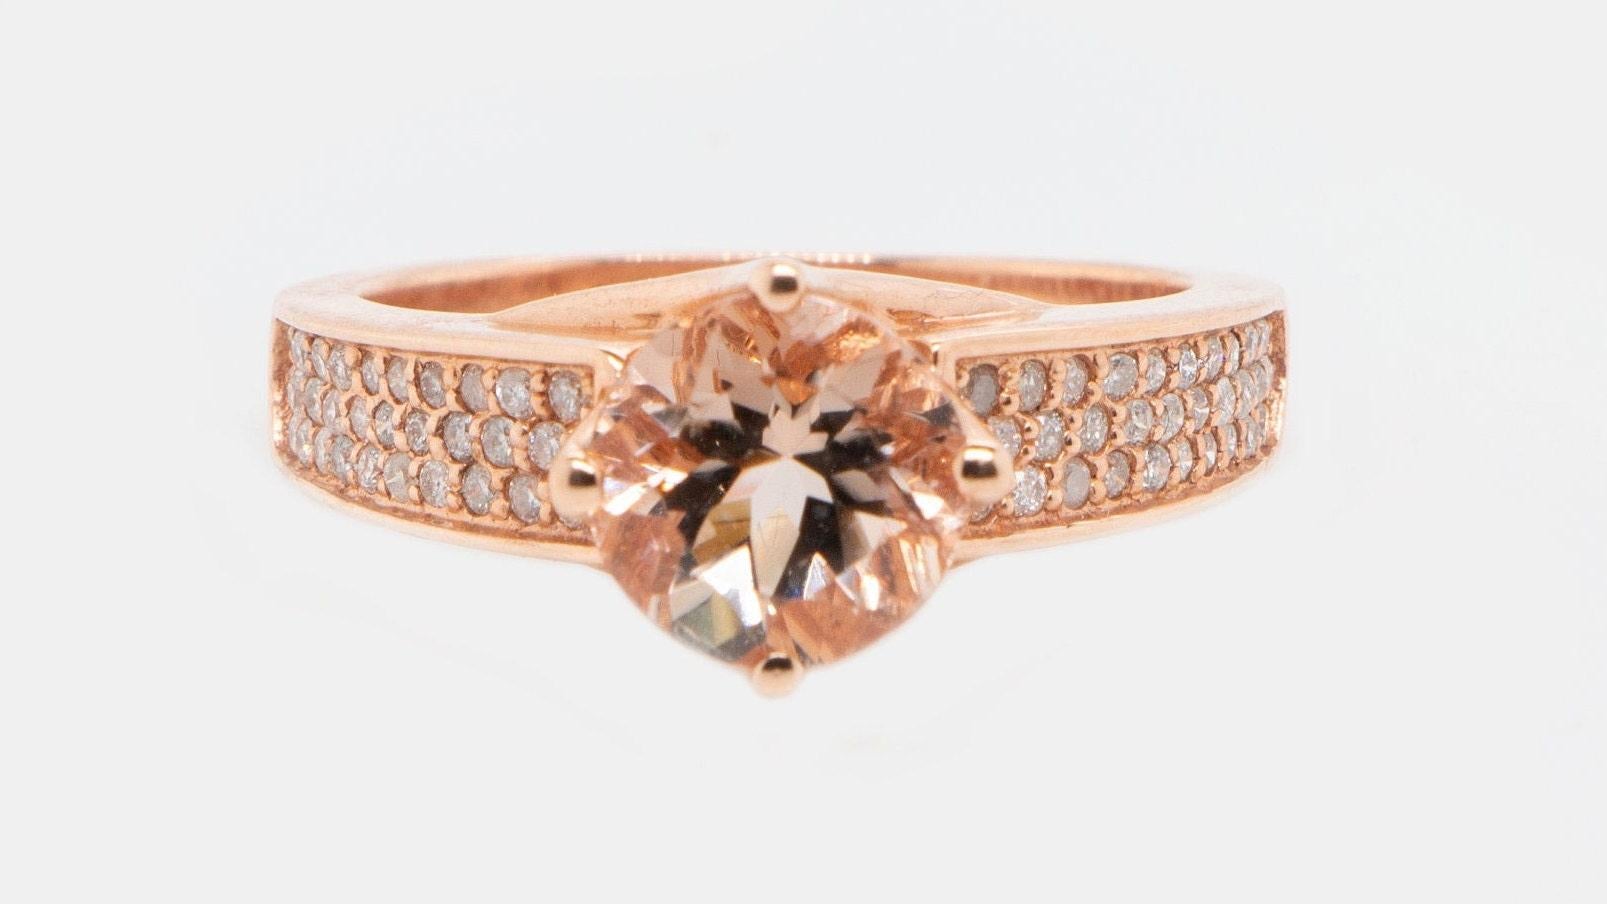 This is a gorgeous natural 1.77 carat round morganite and diamond ring set in solid 14k rose gold. The natural 8MM round morganite has an excellent peachy pink color (AAA quality gems) and is surrounded by a thick halo of round cut white diamonds.